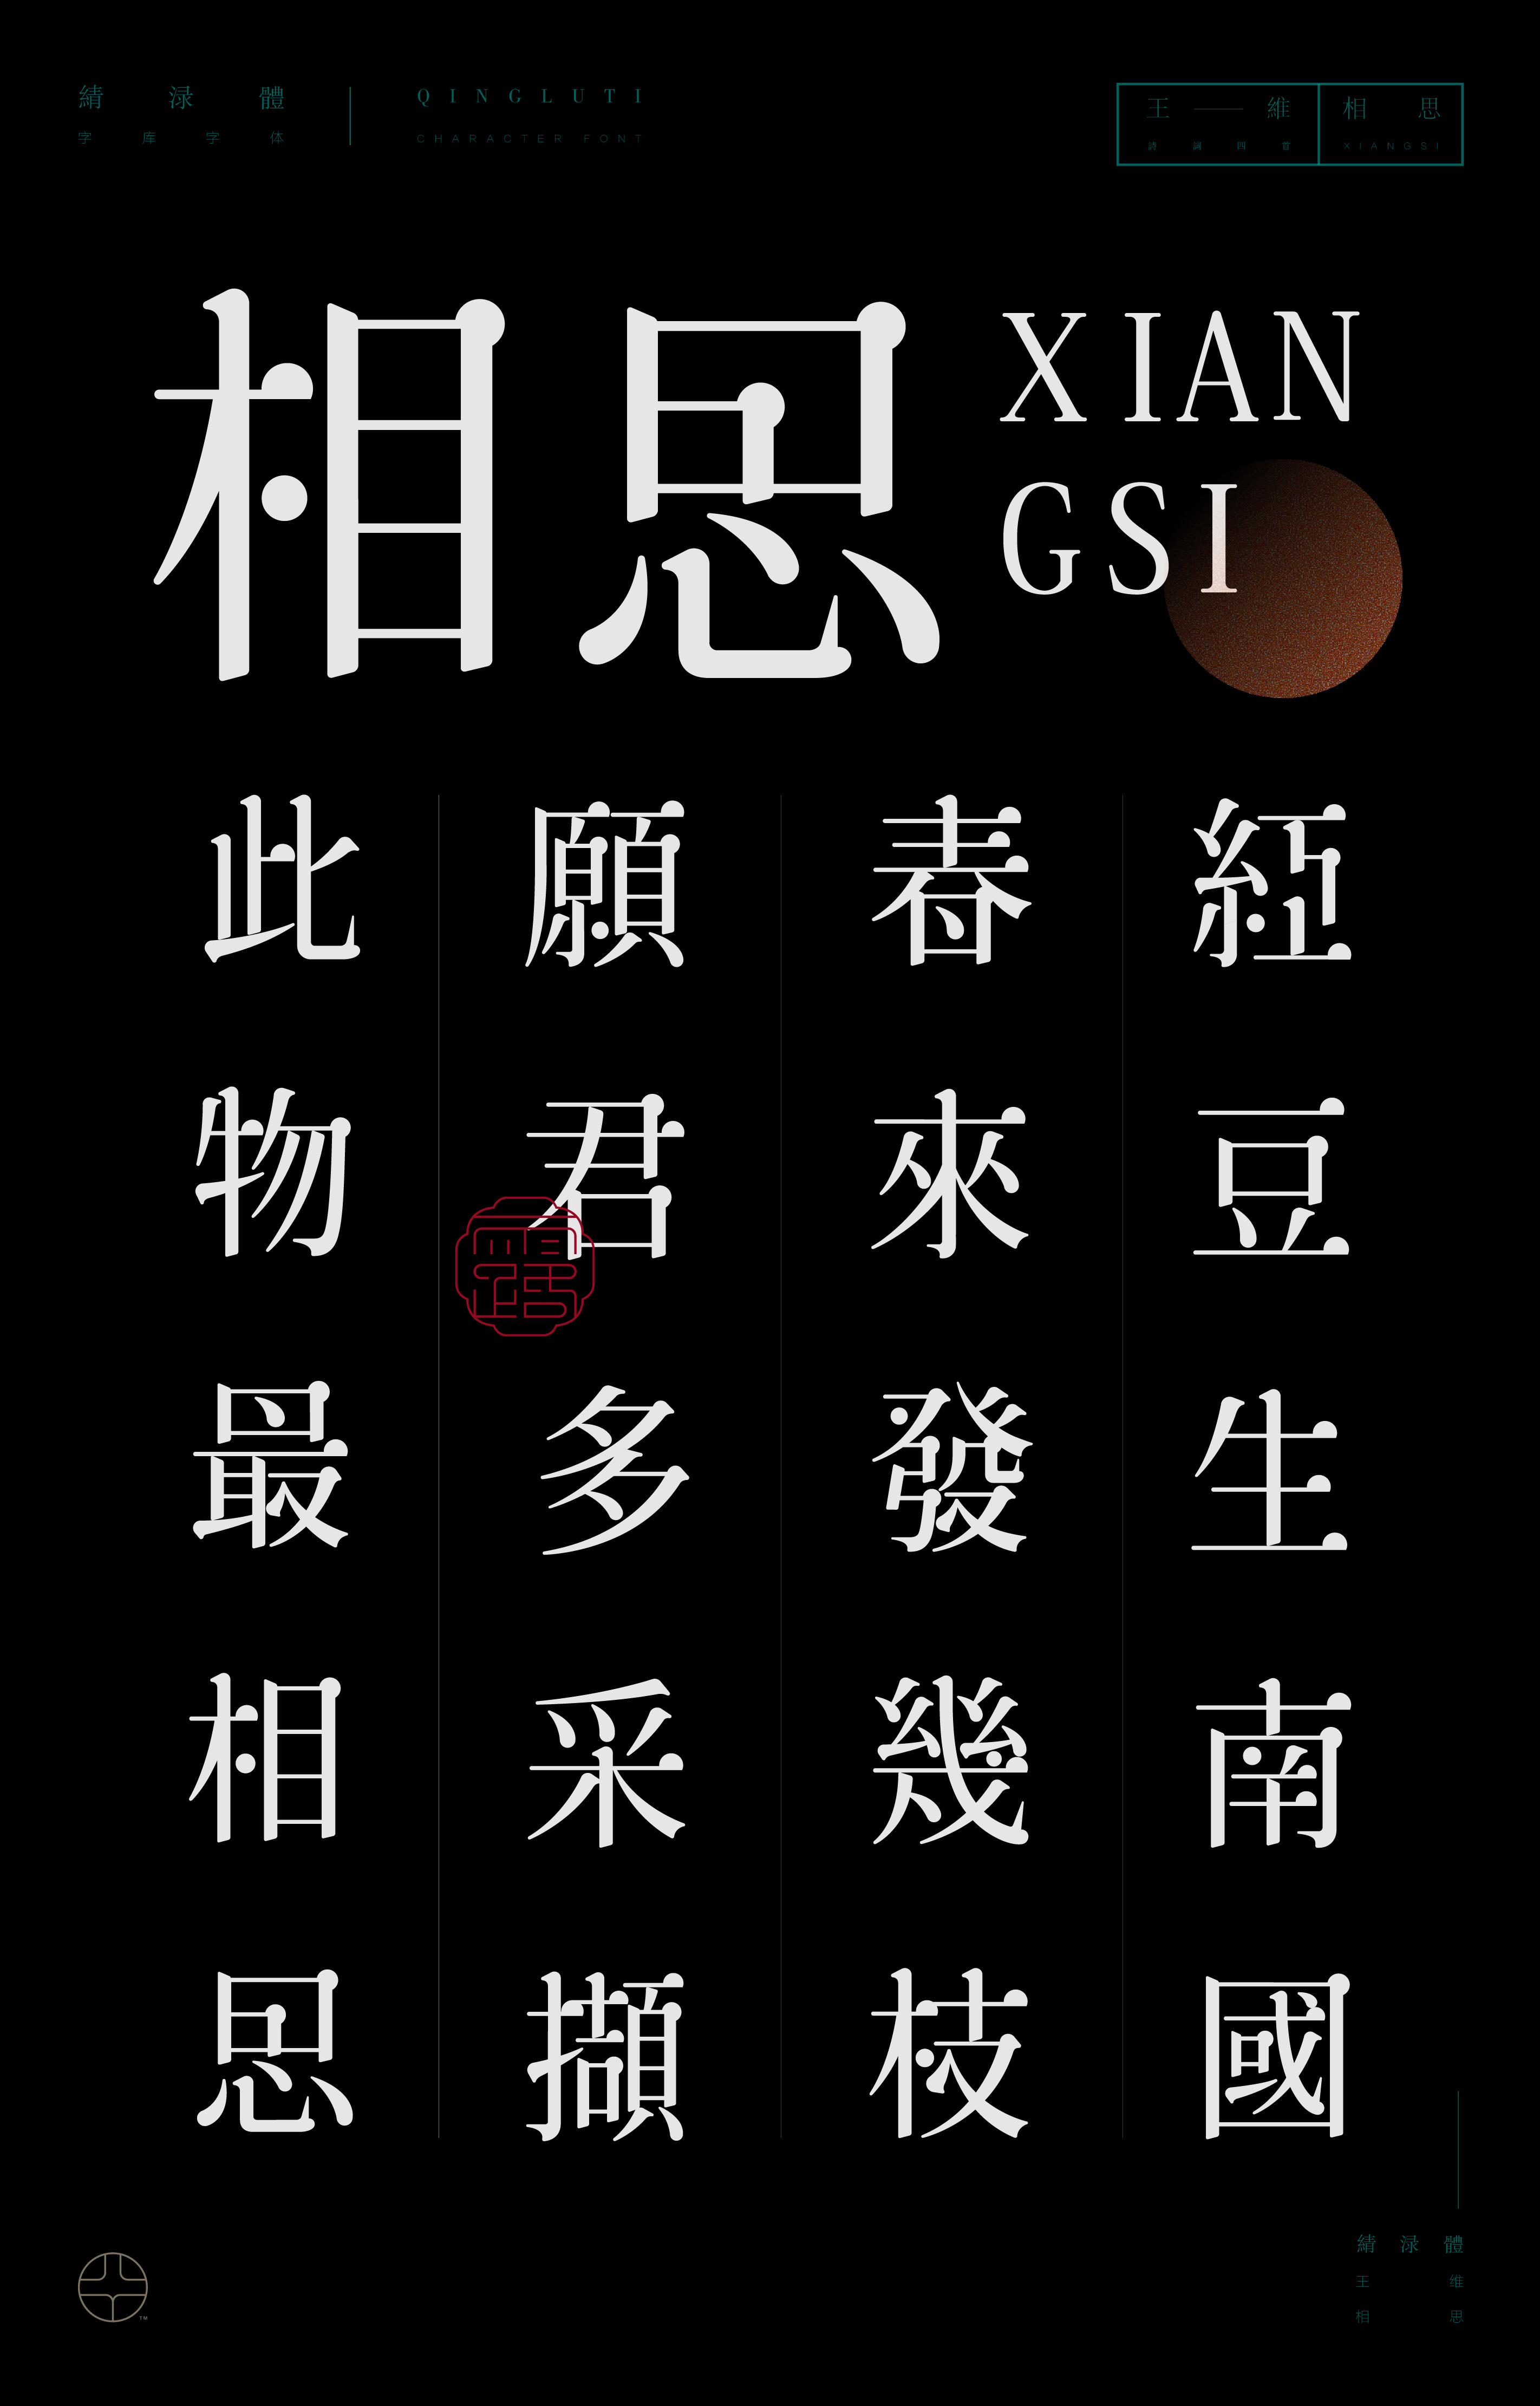 chinese font final cut pro download